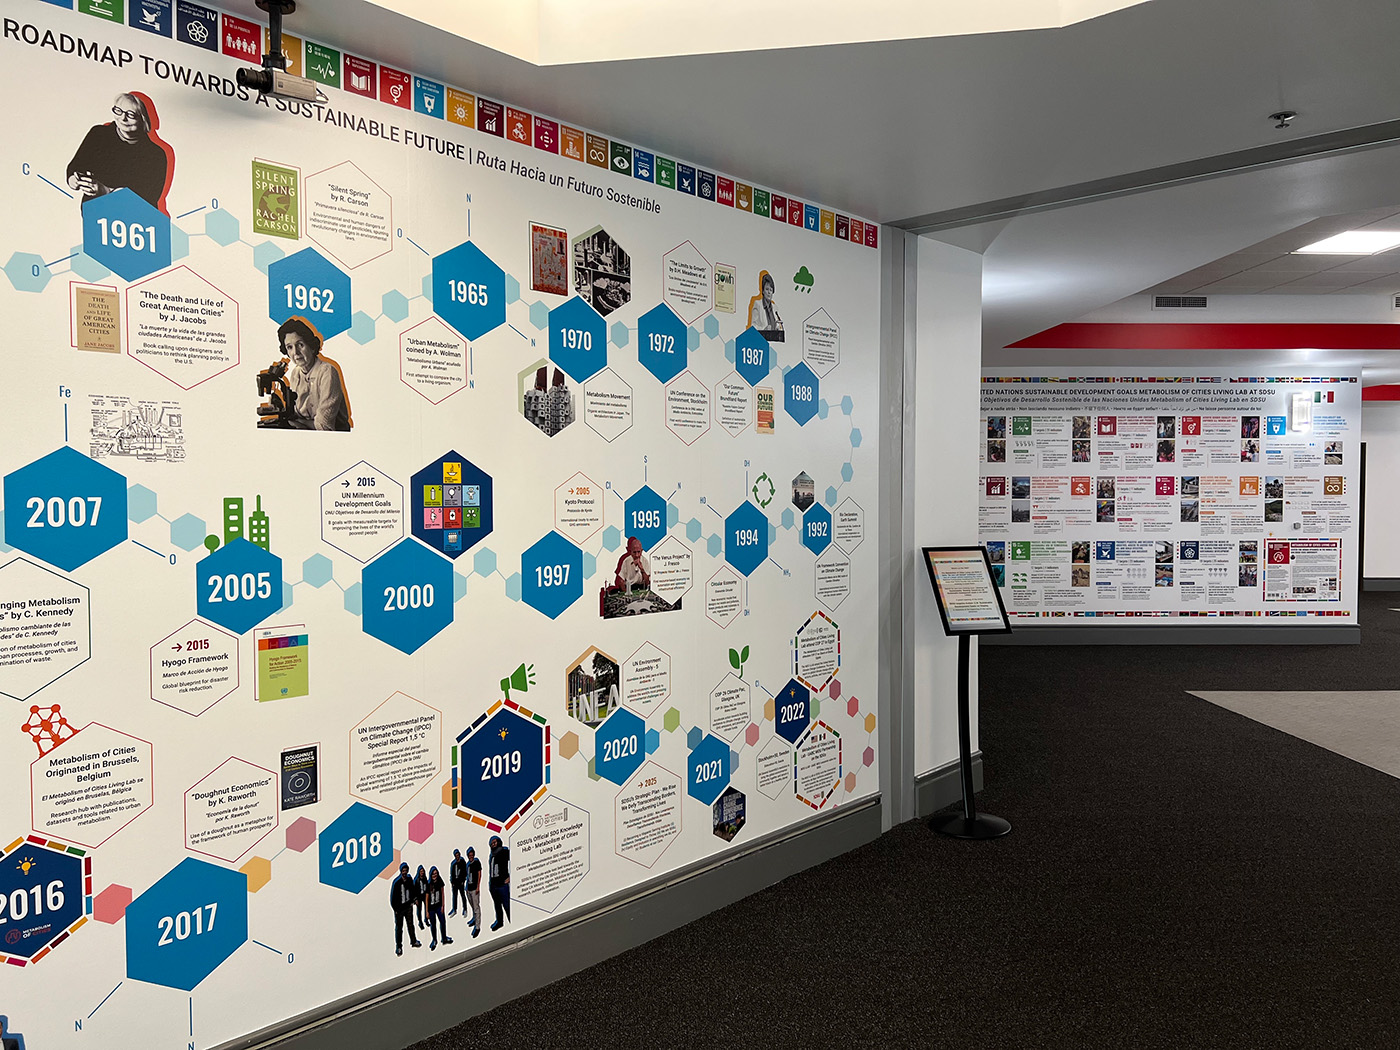 SDSU Library Donor Hall, Metabolism of Cities Living Lab-SDSU 4 SDGs “Leave No One Behind” exhibition, focus on wall with 'Roadmap Towards a Sustainable Future' display